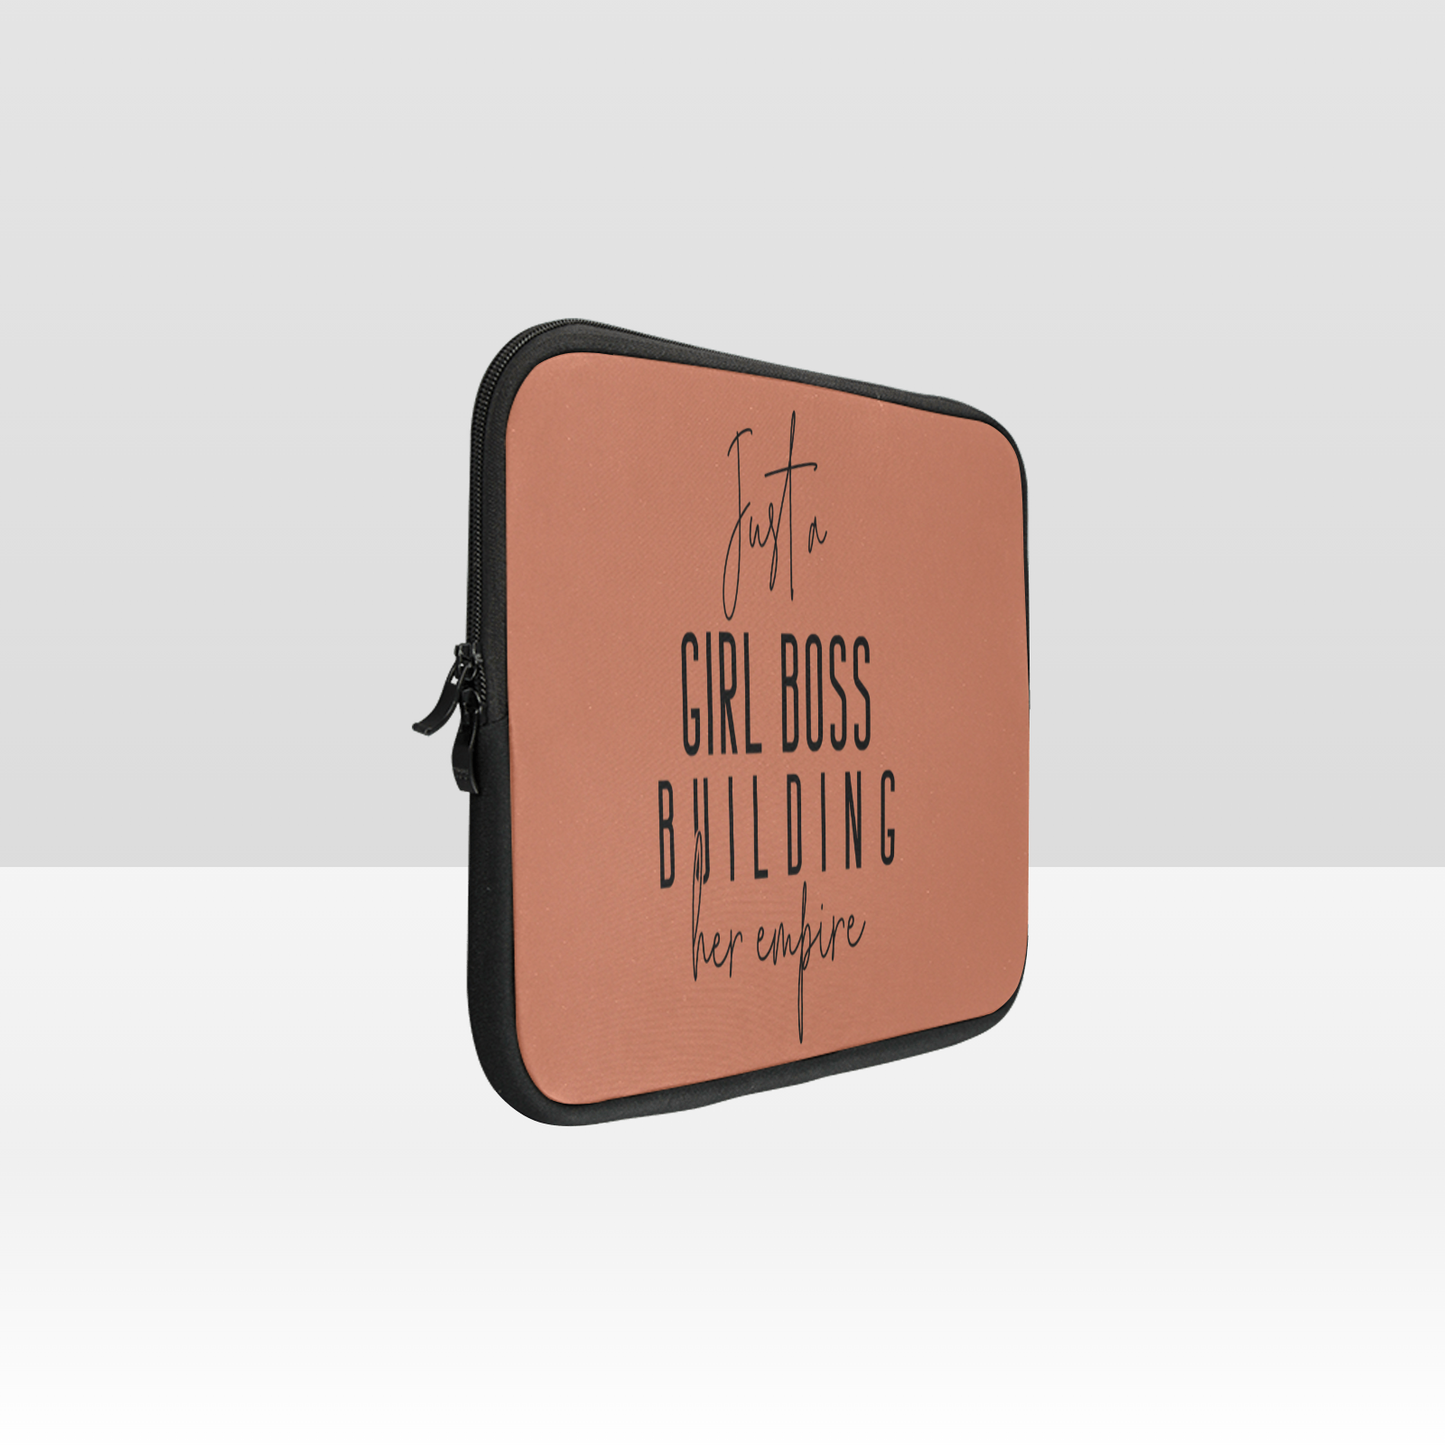 Just A Girl Boss Building Her Empire Laptop Sleeve - Blush